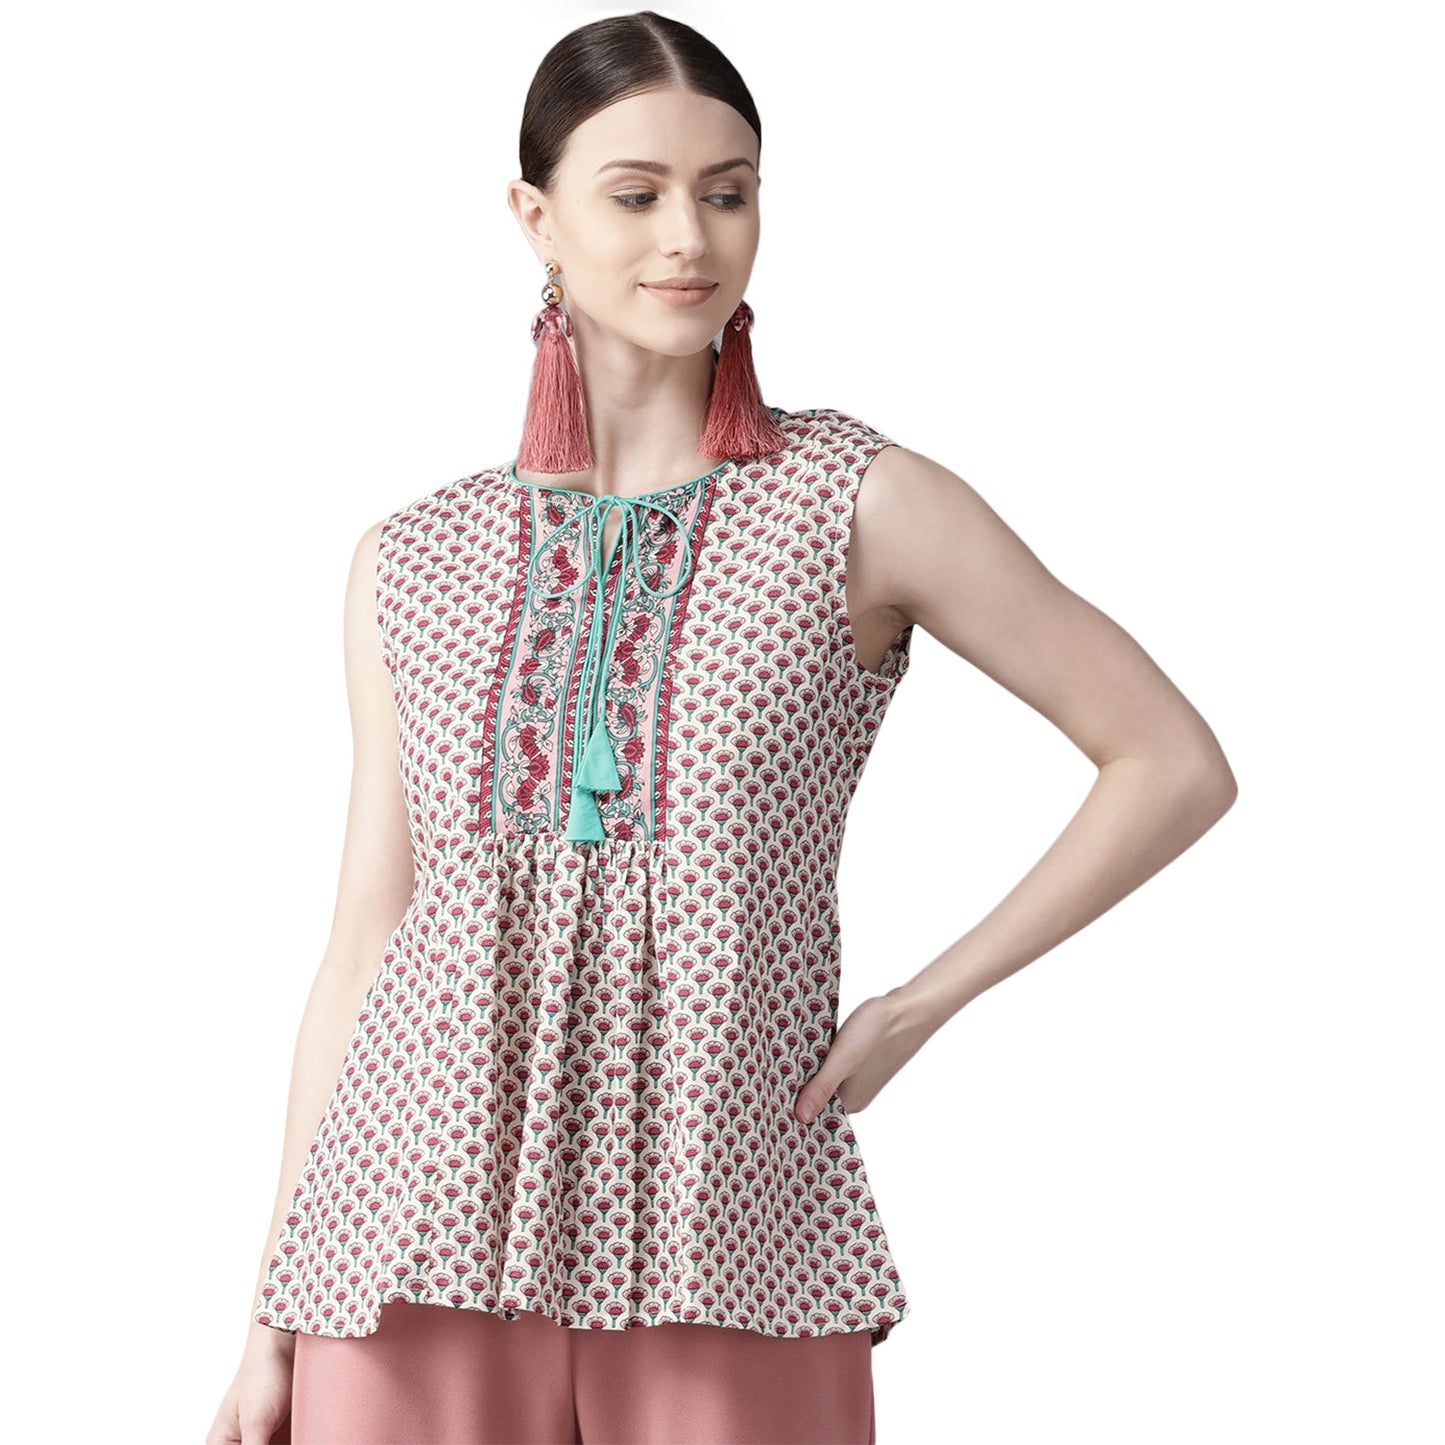 Bhama Couture Red & White Printed Top